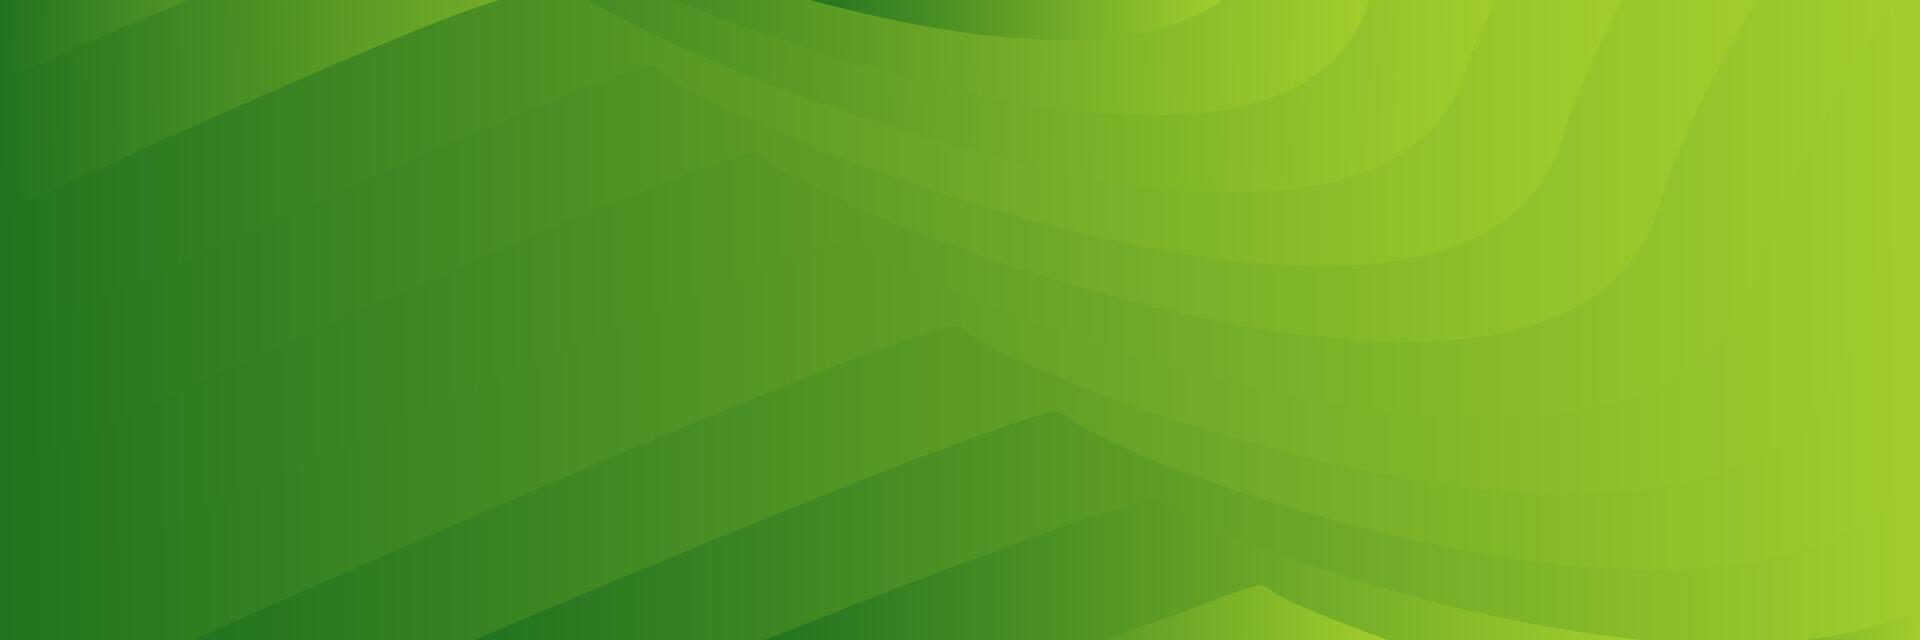 abstract elegant green background with lines vector